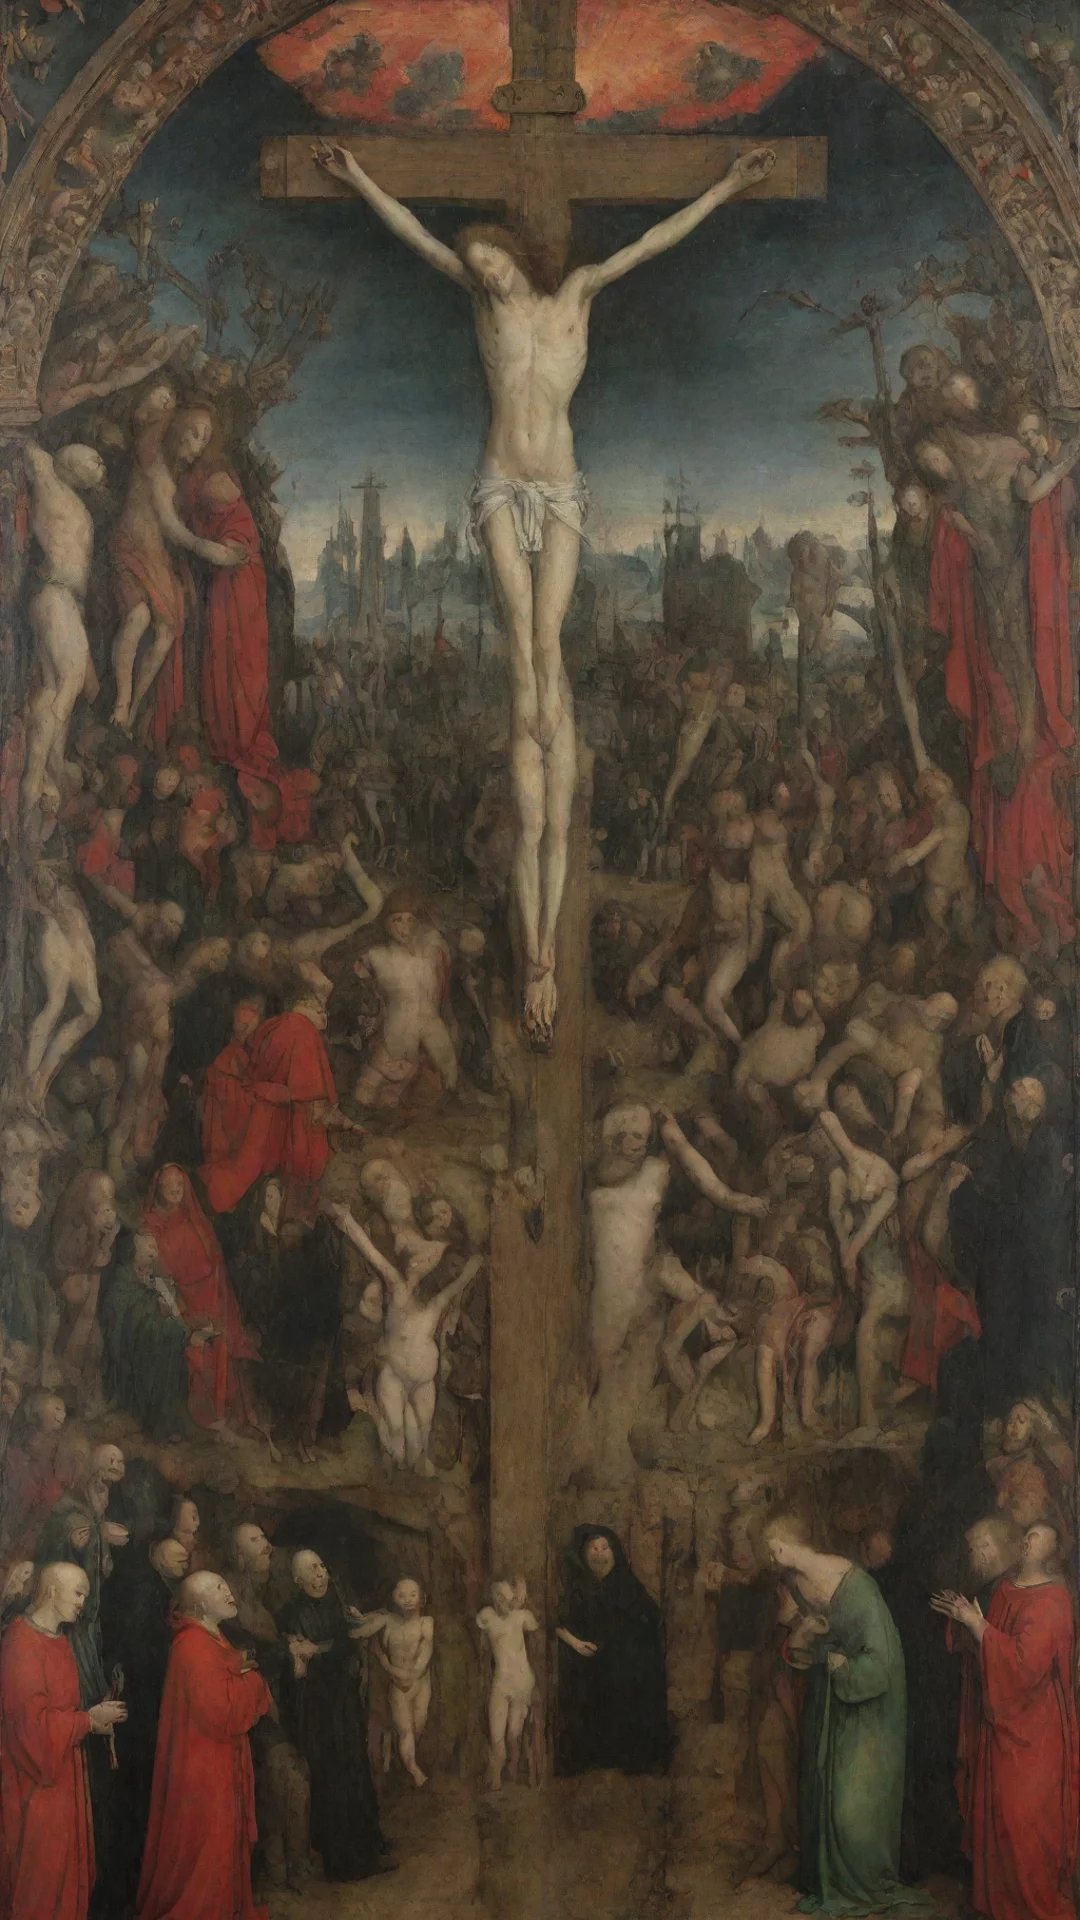 crucifixion and last judgement by jan van eyck tall